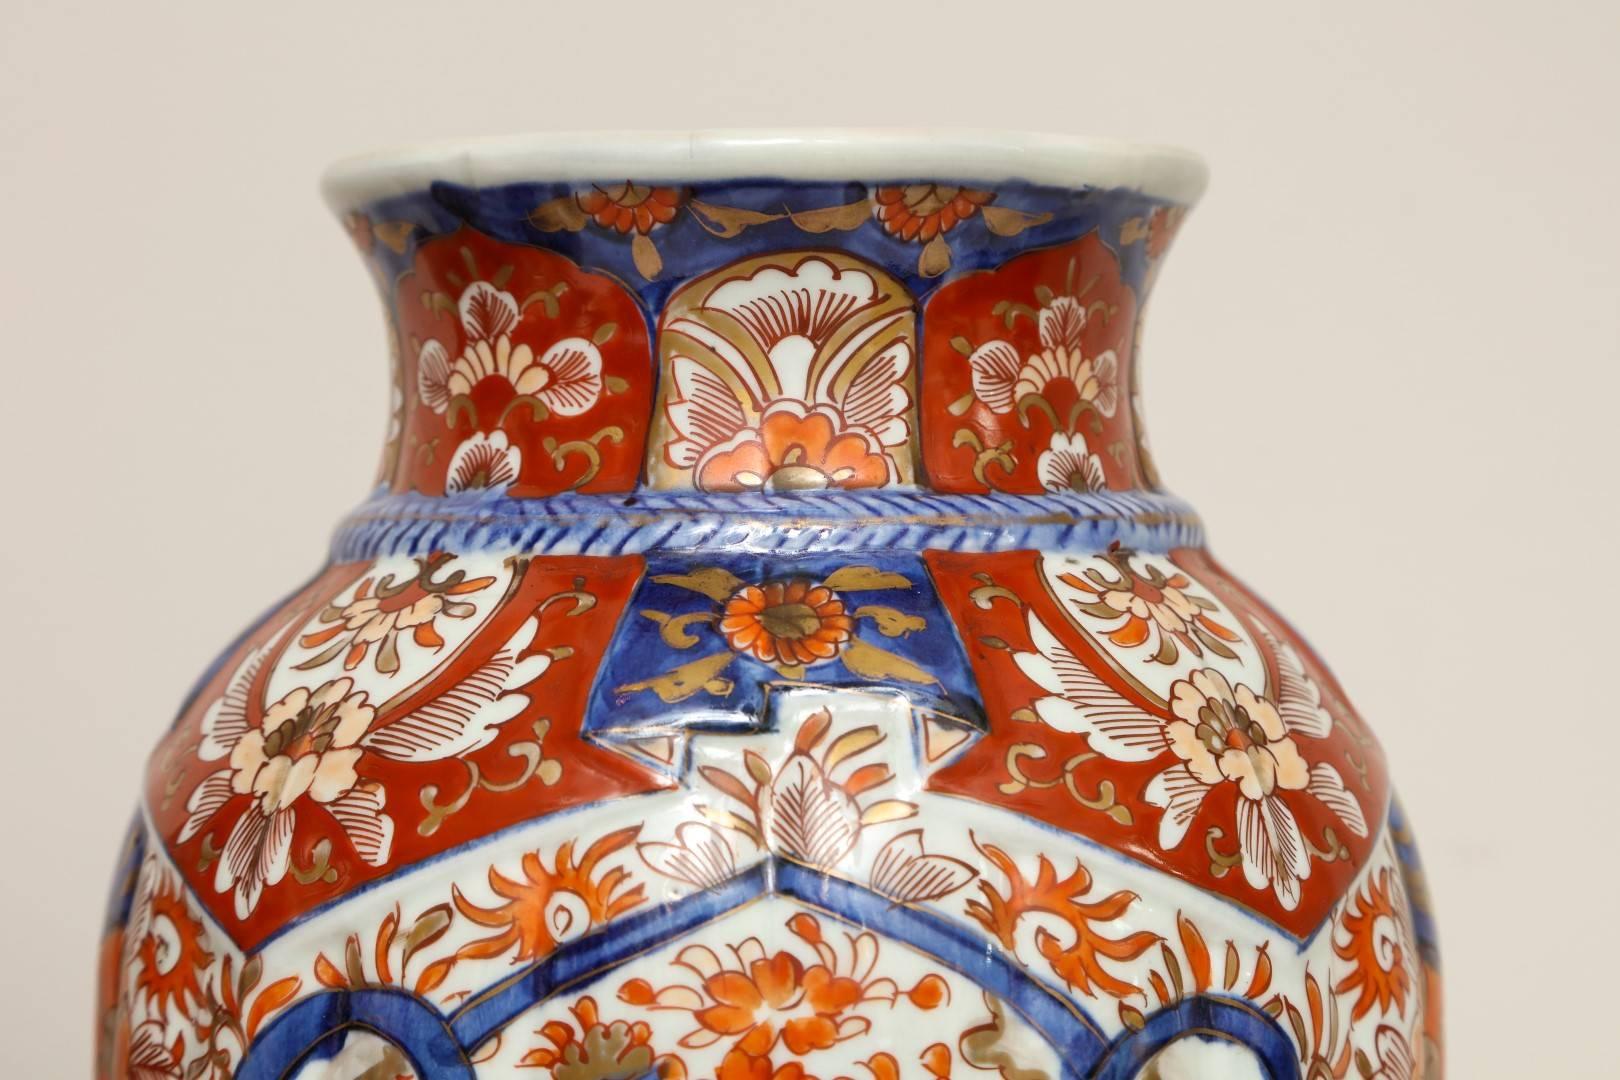 A pair of Japanese Imari porcelain vases, ovoid shape decorated in white ground with gilt highlights and shaped panels in blue and red, motif of blossoming flowers, birds and chrysanthemums.